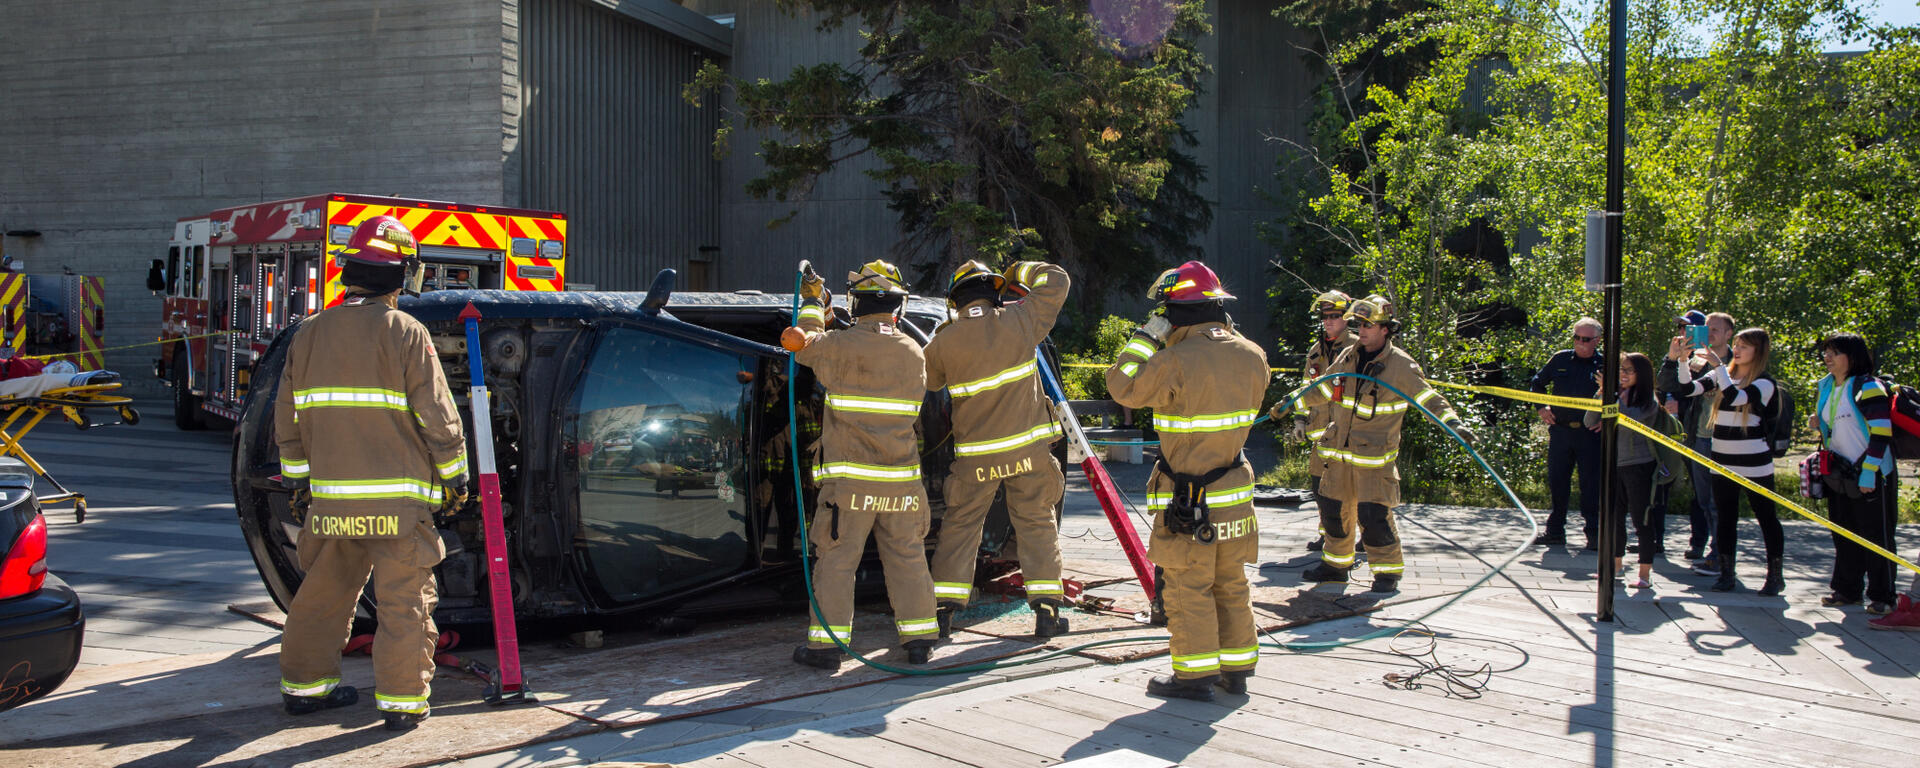 Firefighters extracting from vehicle